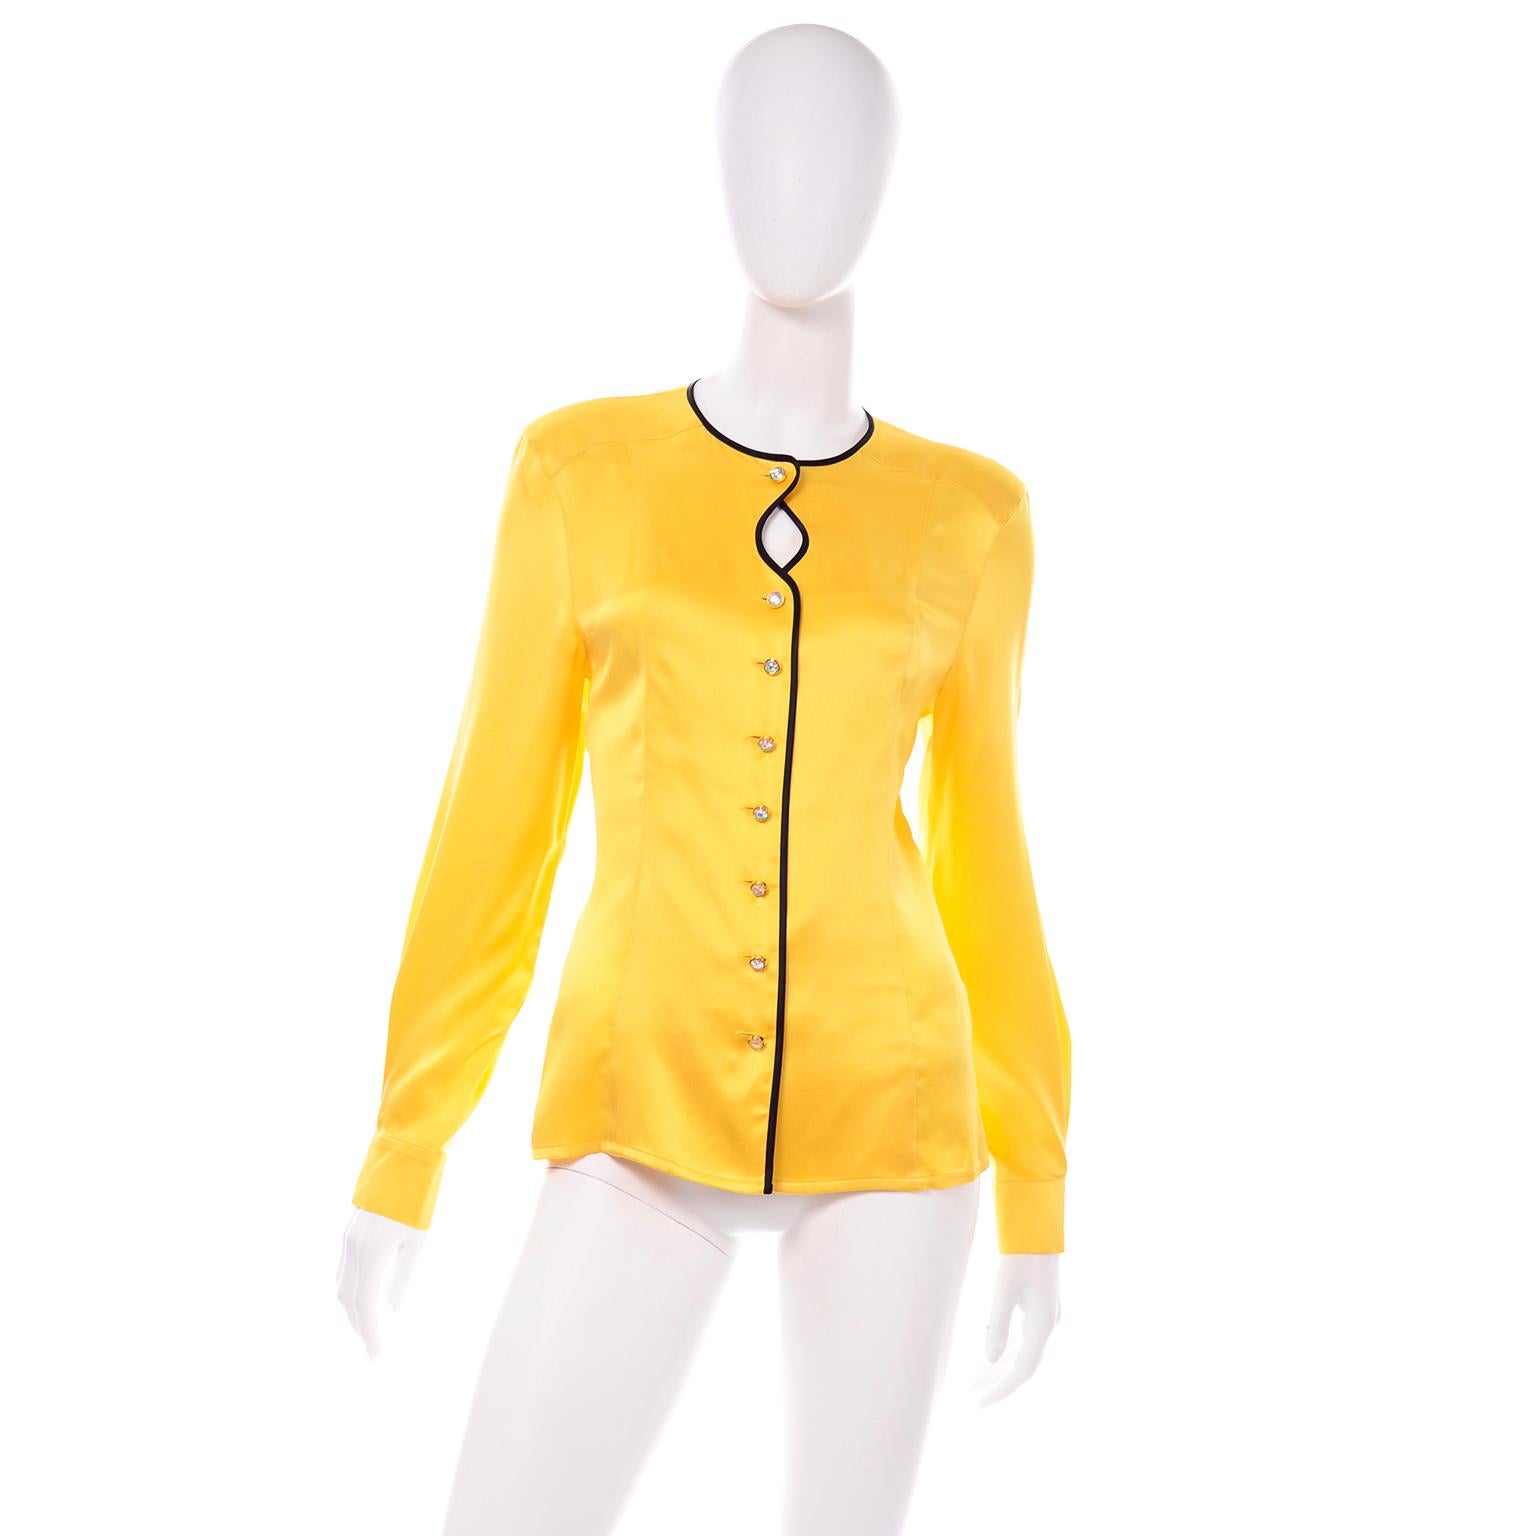 This unique golden yellow silk blouse by Escada is really beautiful, and it is made with the care to detail you would expect from the vintage Margaretha Ley Escada pieces.The buttons are beautiful iridescent gems in gold tone monogrammed settings.